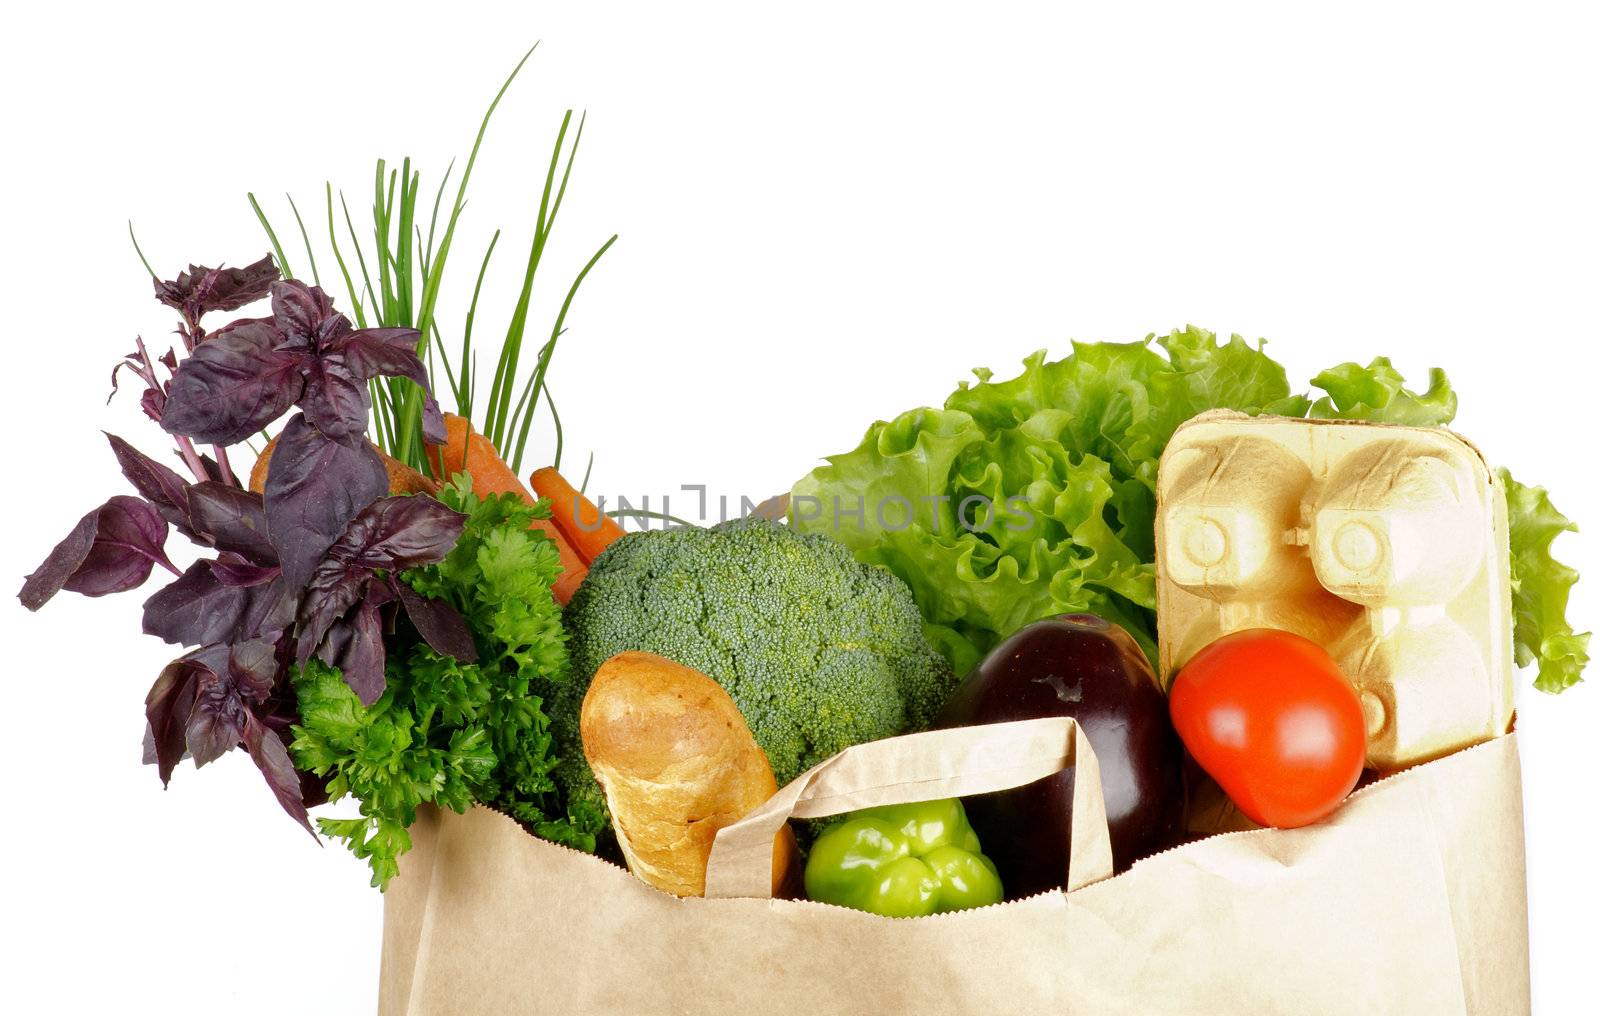 Healthy Eating in Shopping Bag with bread, greens, eggs and fruits isolated on white background